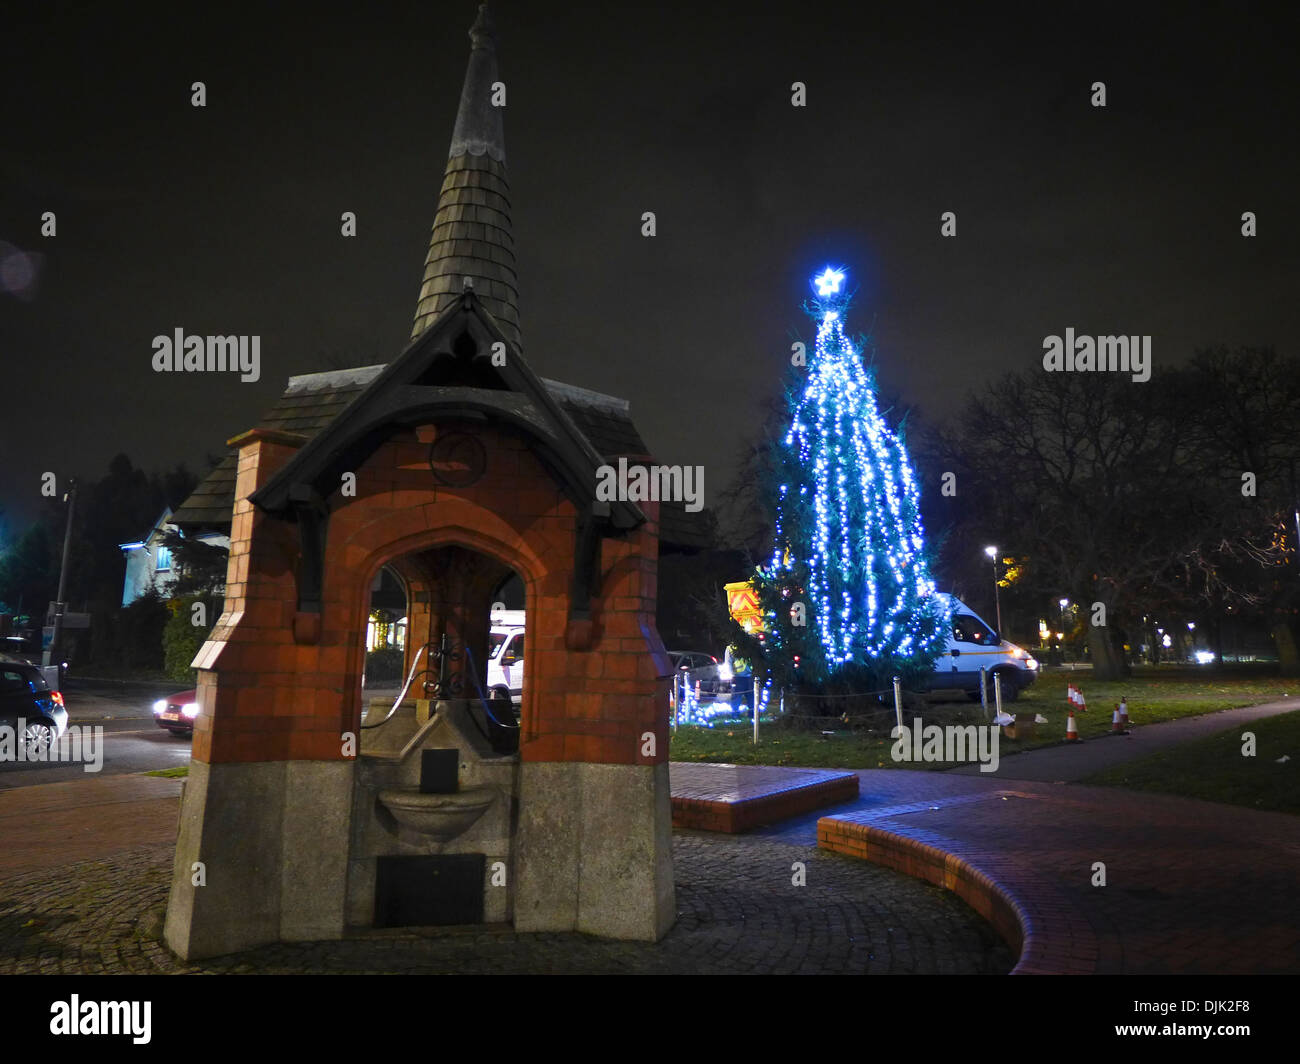 The Christmas tree on George Green, Wanstead, East London with the old horse drinking troughs in the foreground Stock Photo